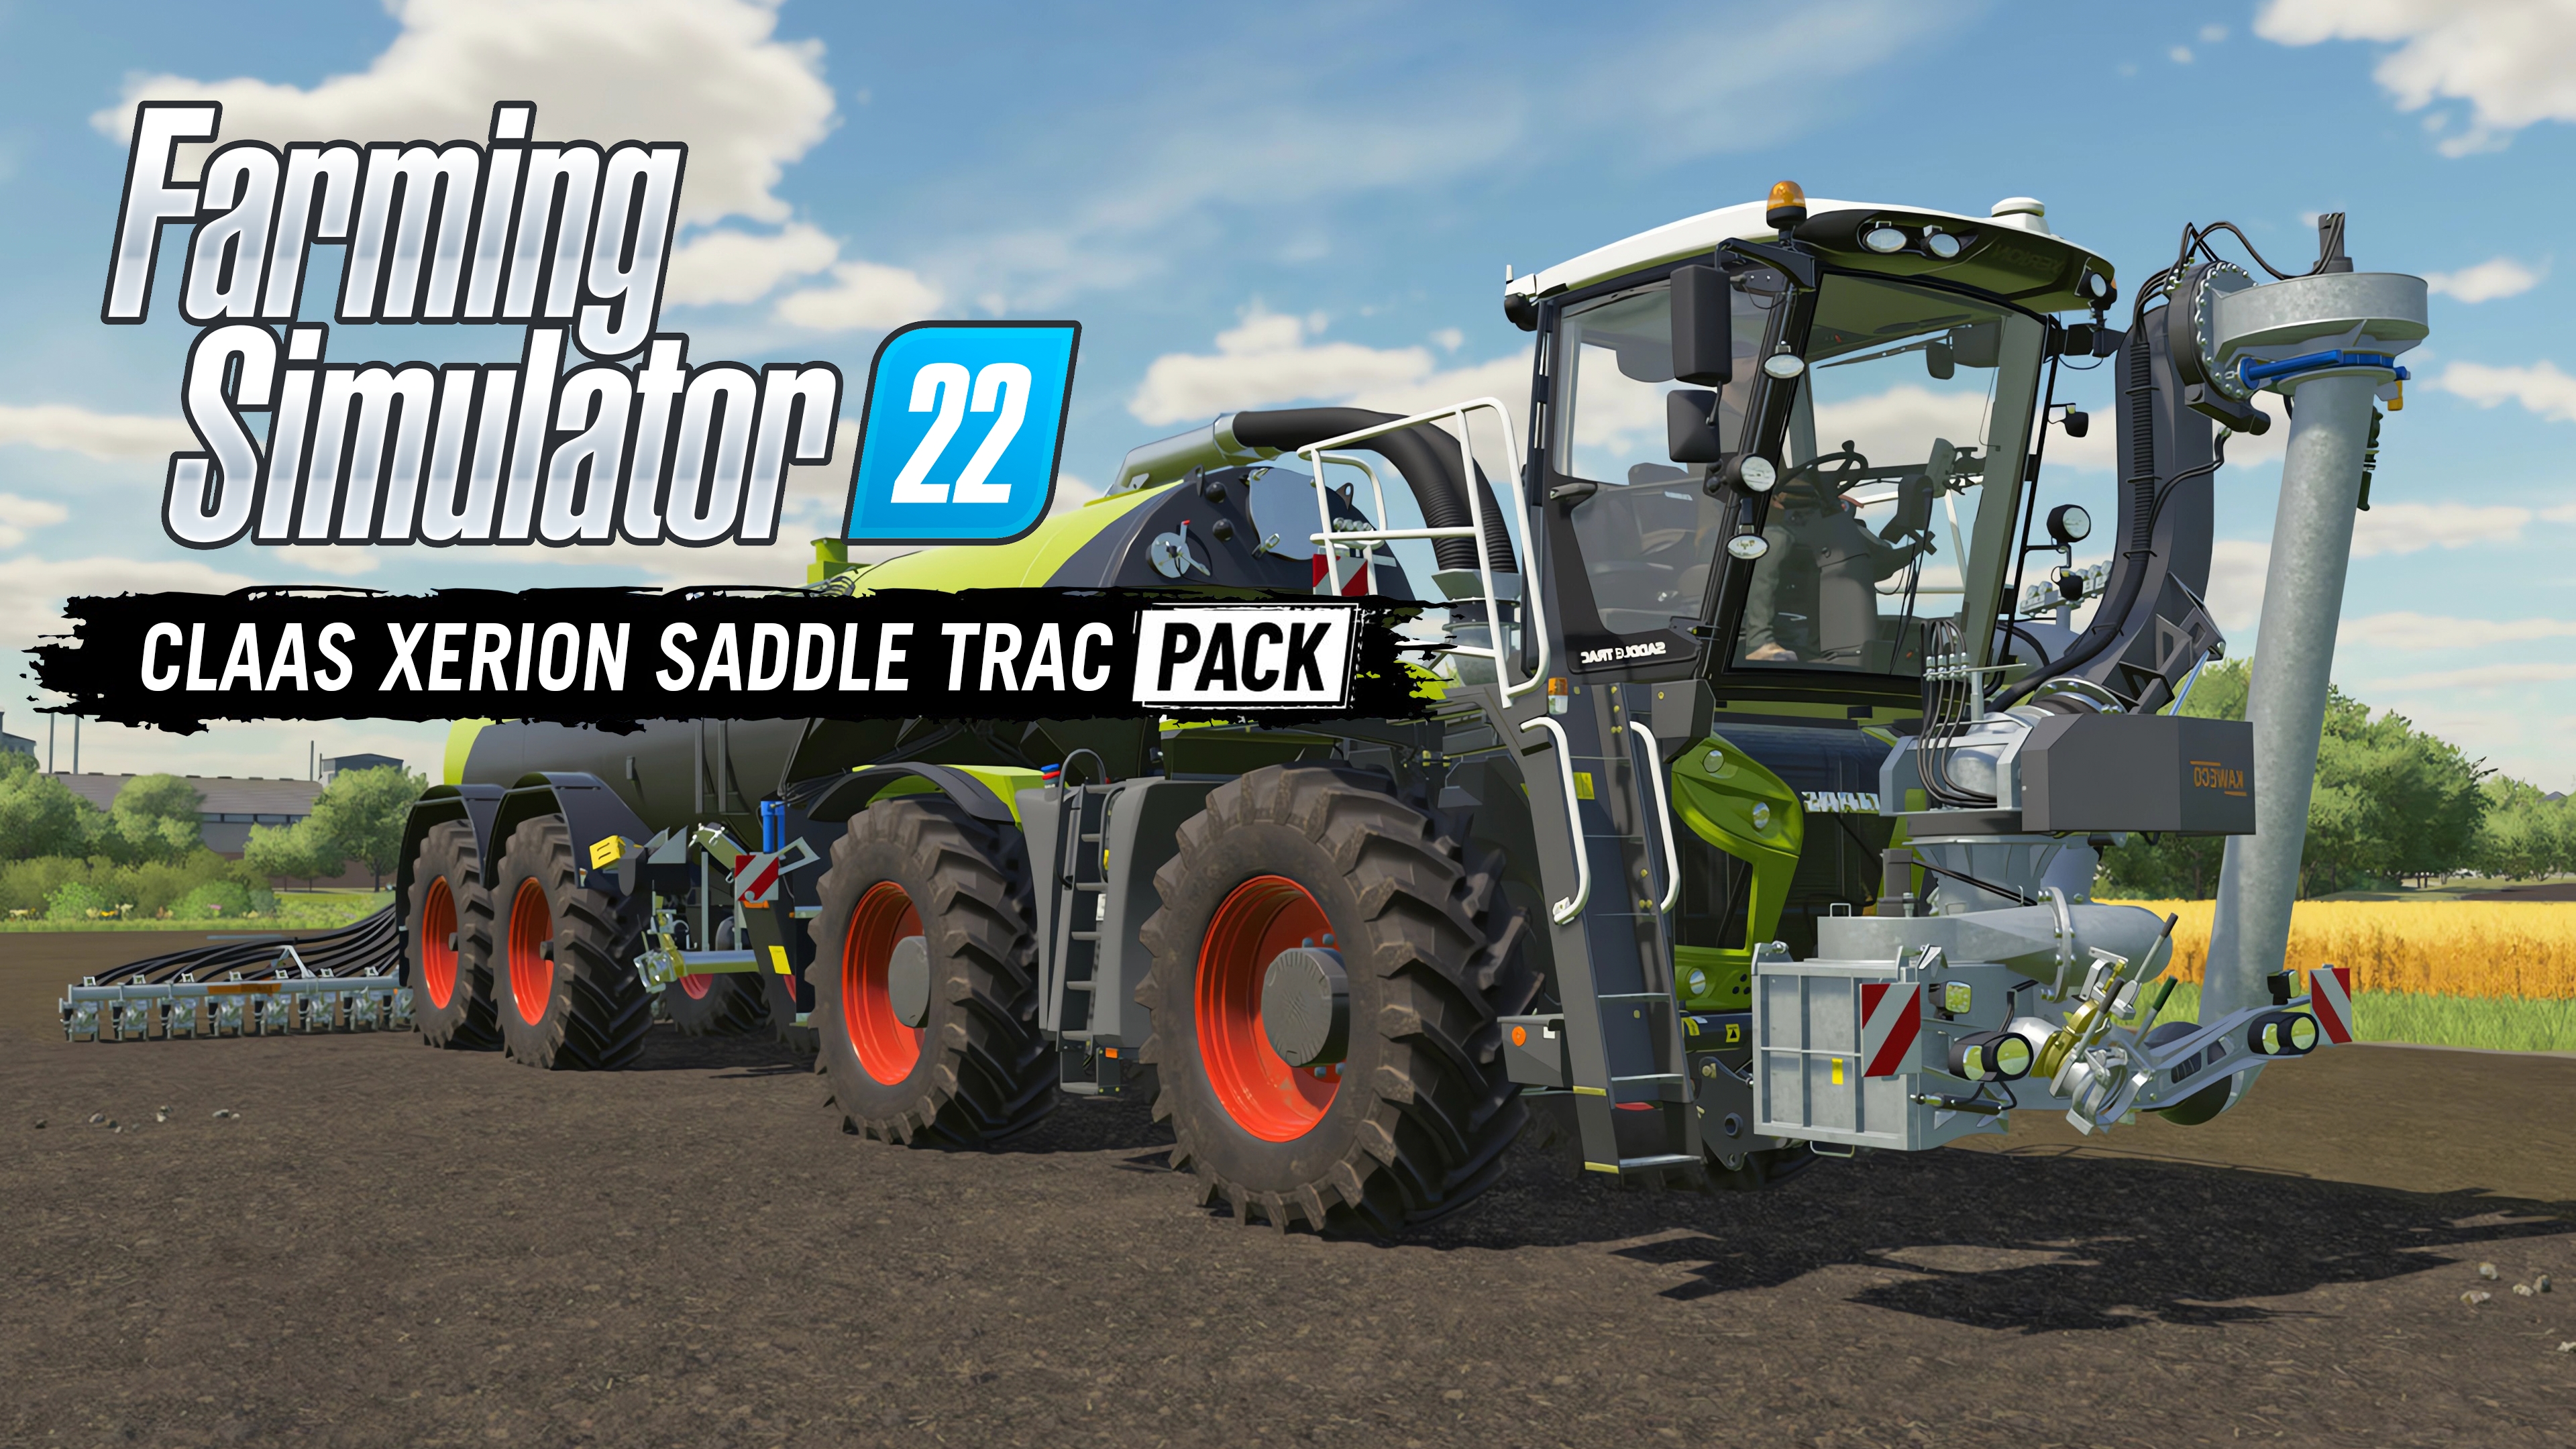 https://gaming-cdn.com/images/products/13230/orig/farming-simulator-22-claas-xerion-saddle-trac-pack-pc-mac-jeu-steam-cover.jpg?v=1694617664